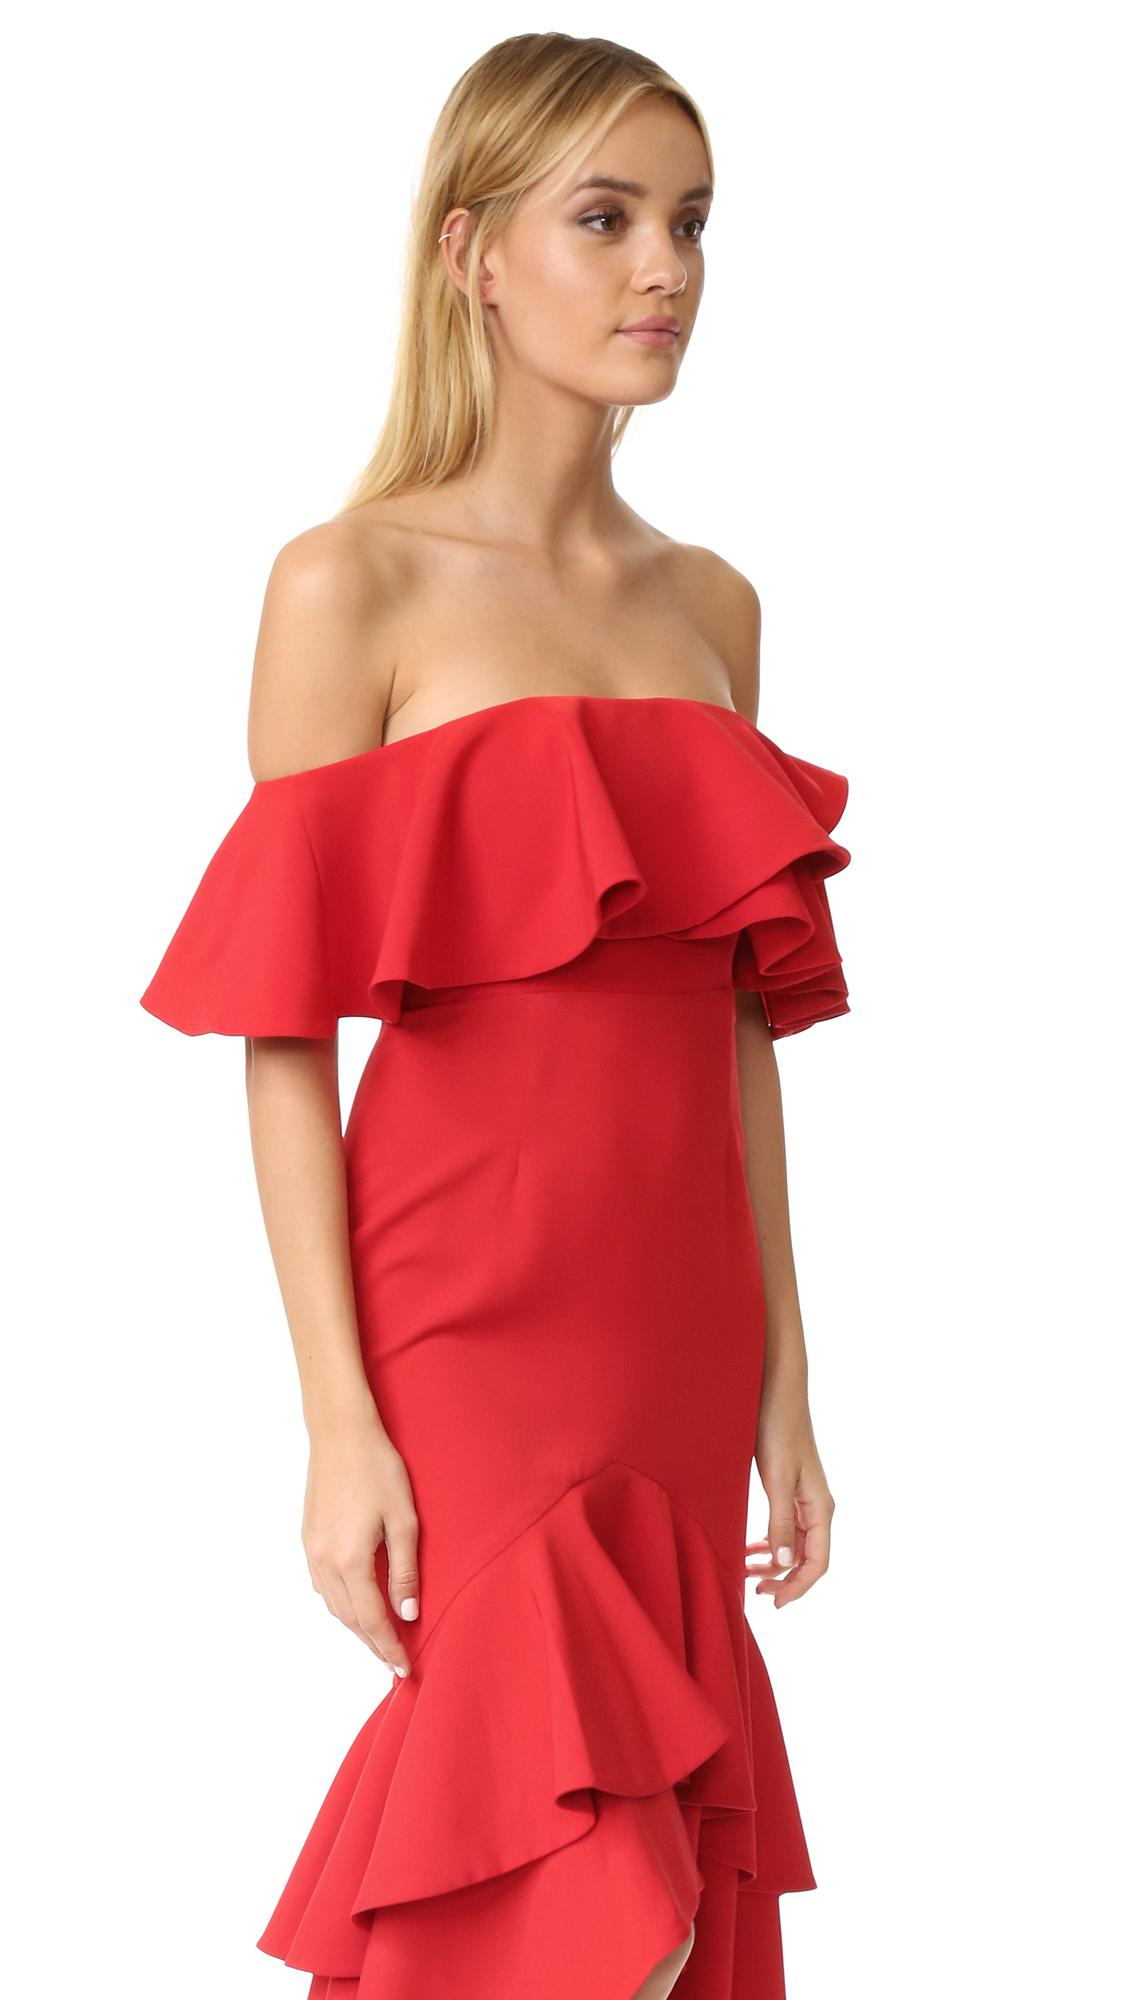 Lyst - Fame & Partners Sasha Dress in Red